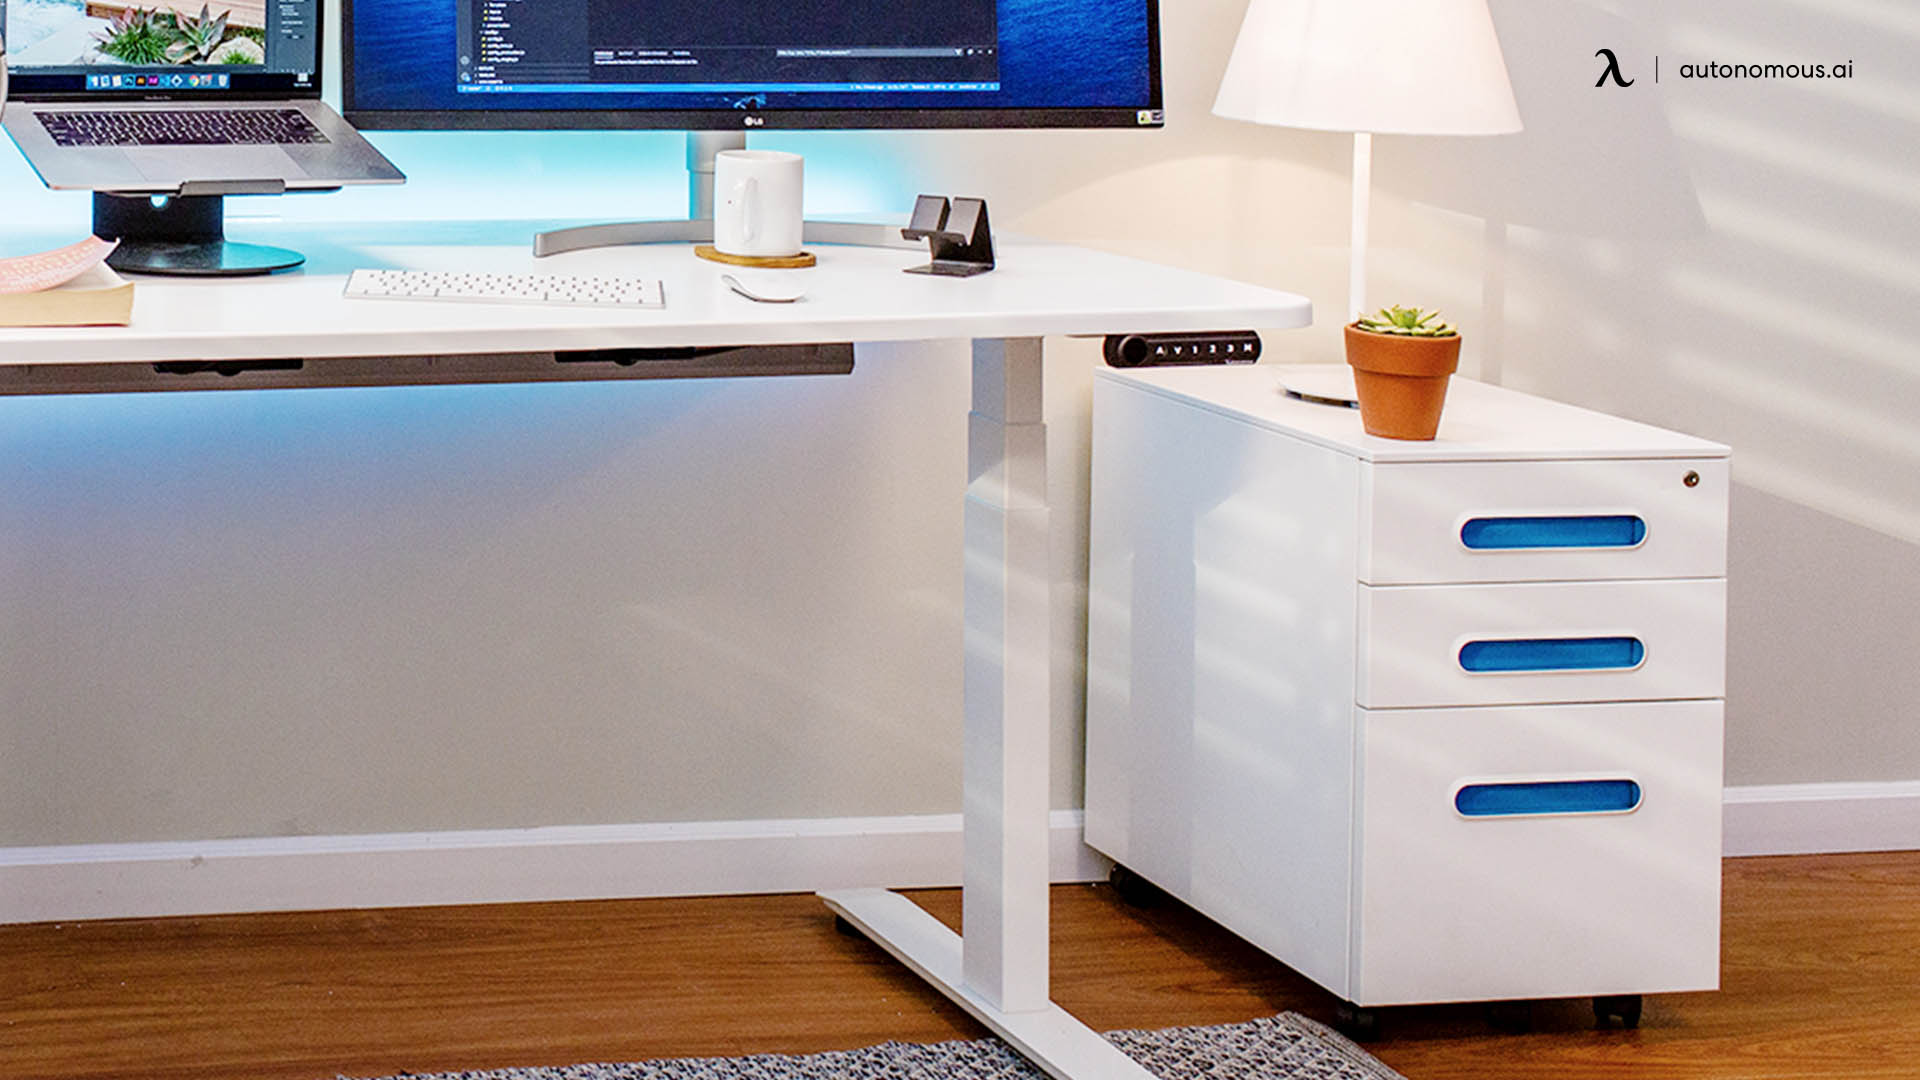 How to Choose an Under Desk Cabinet?